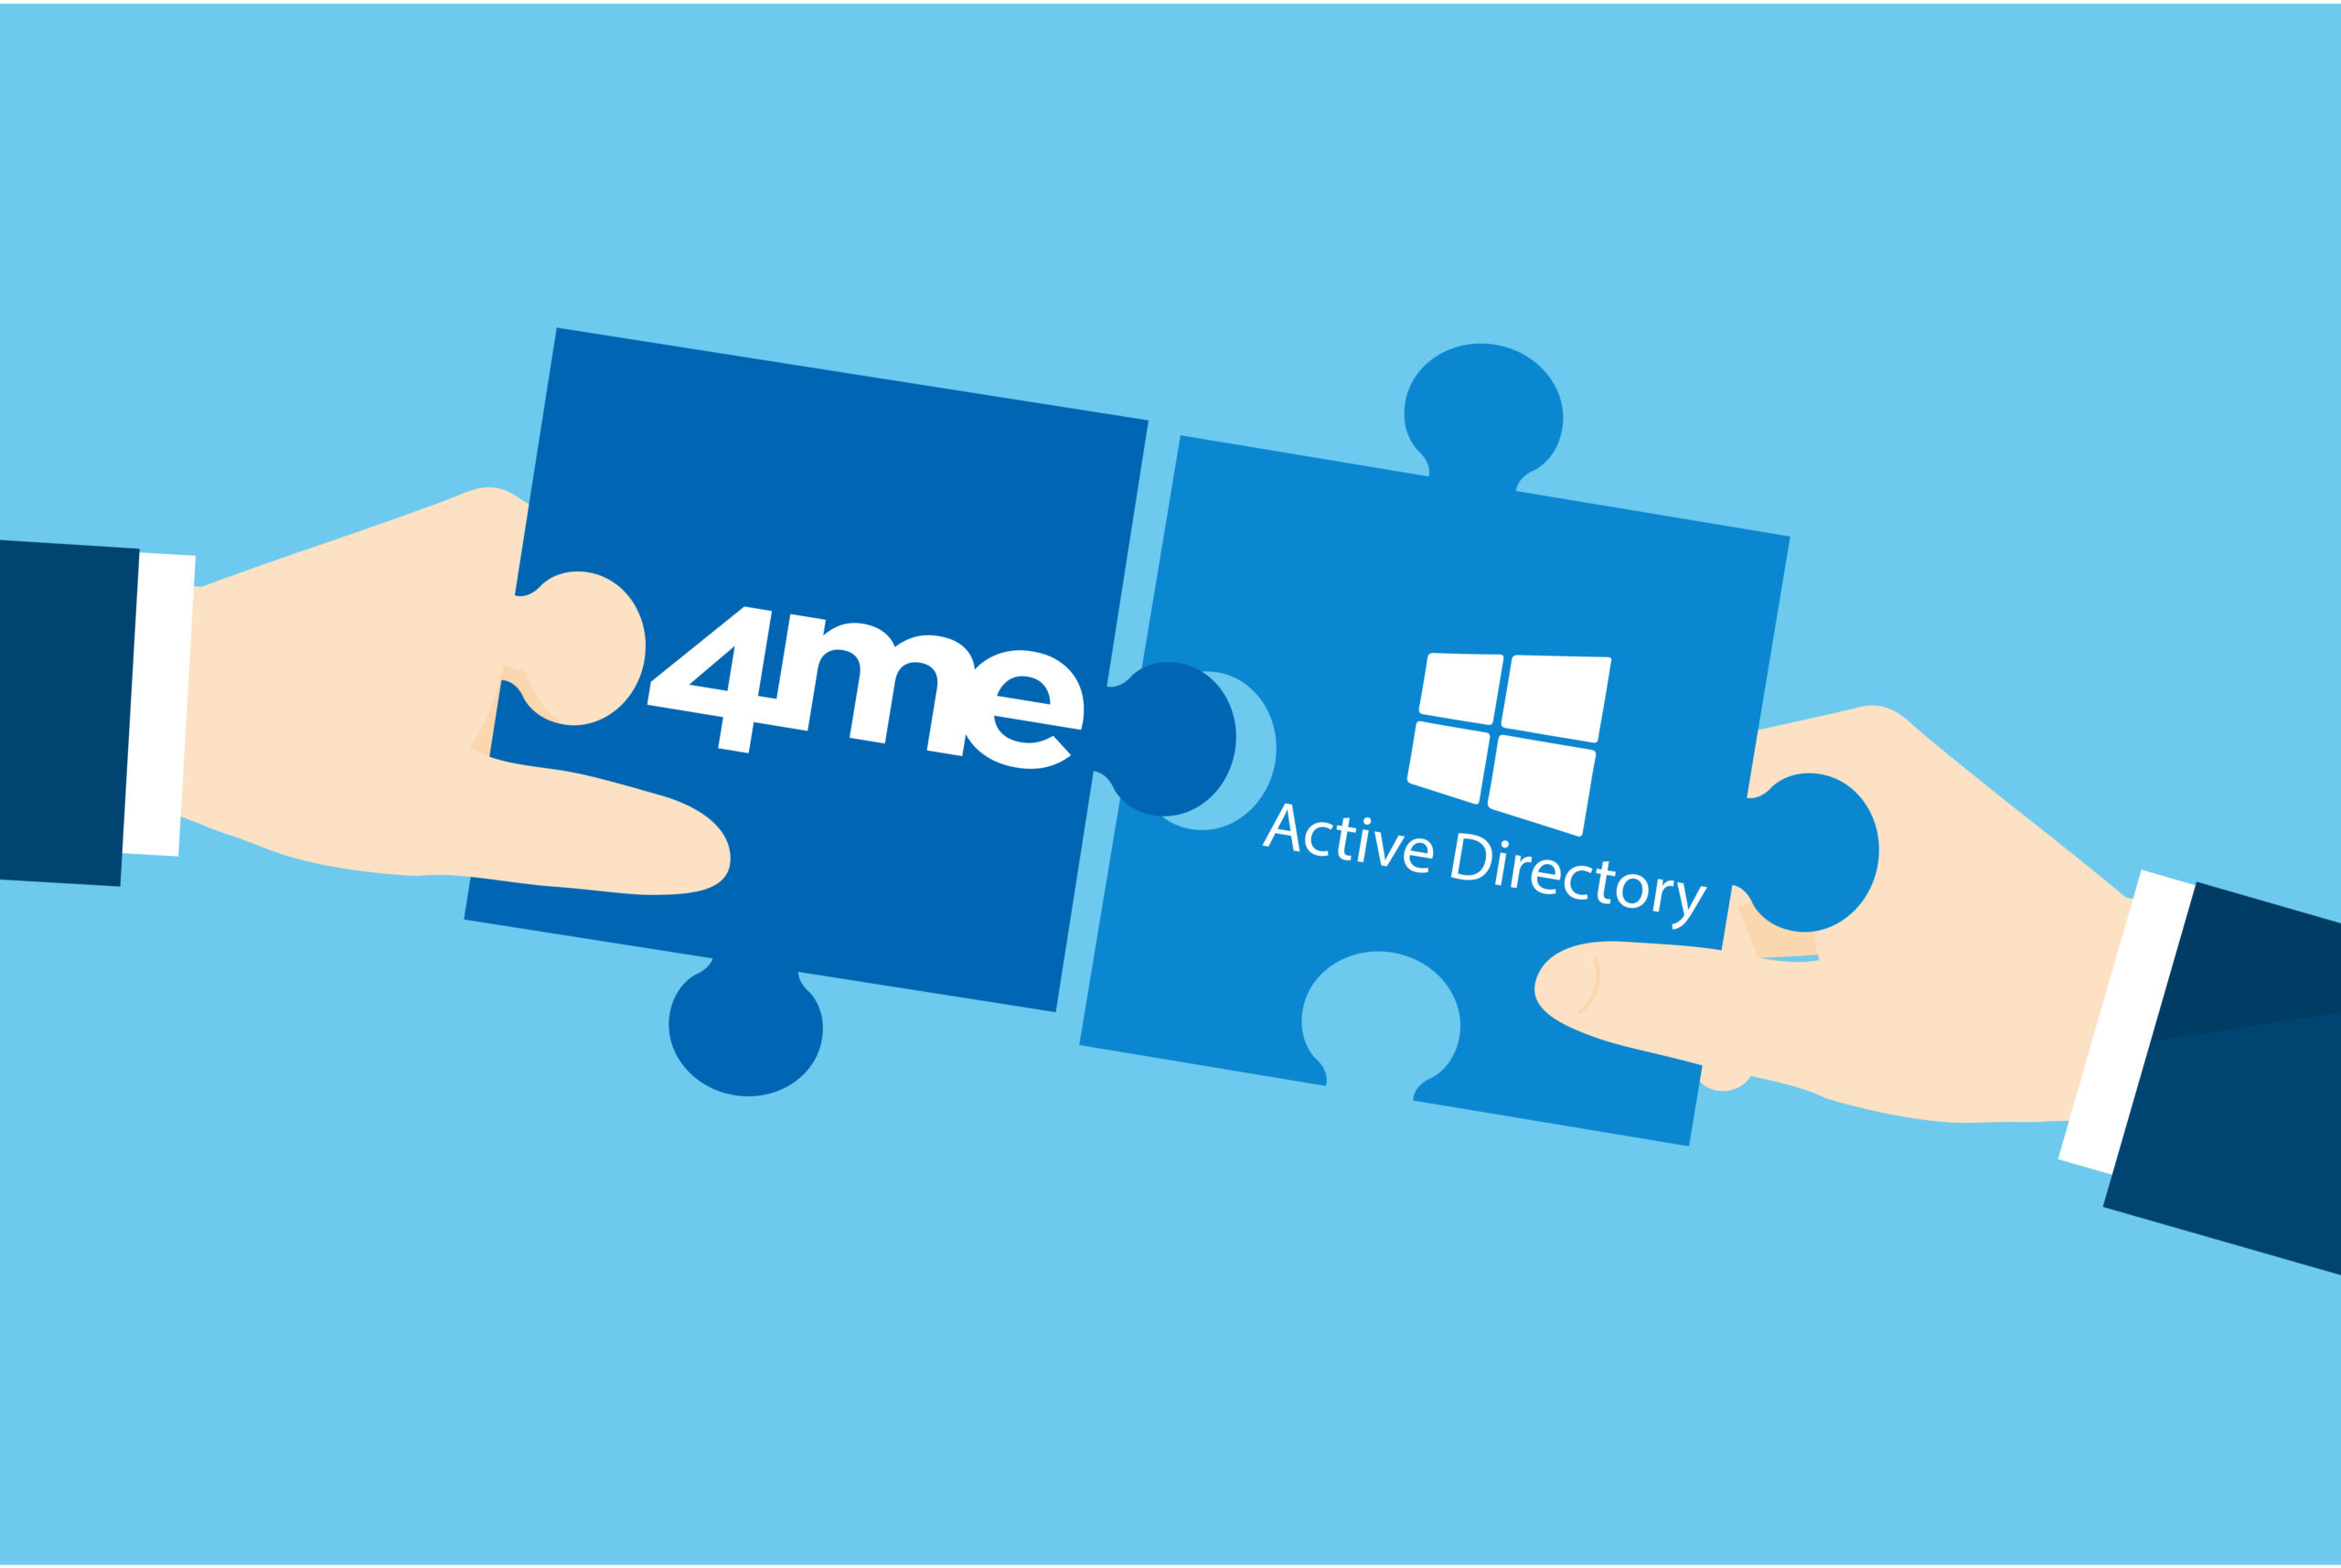 4me active directory integration